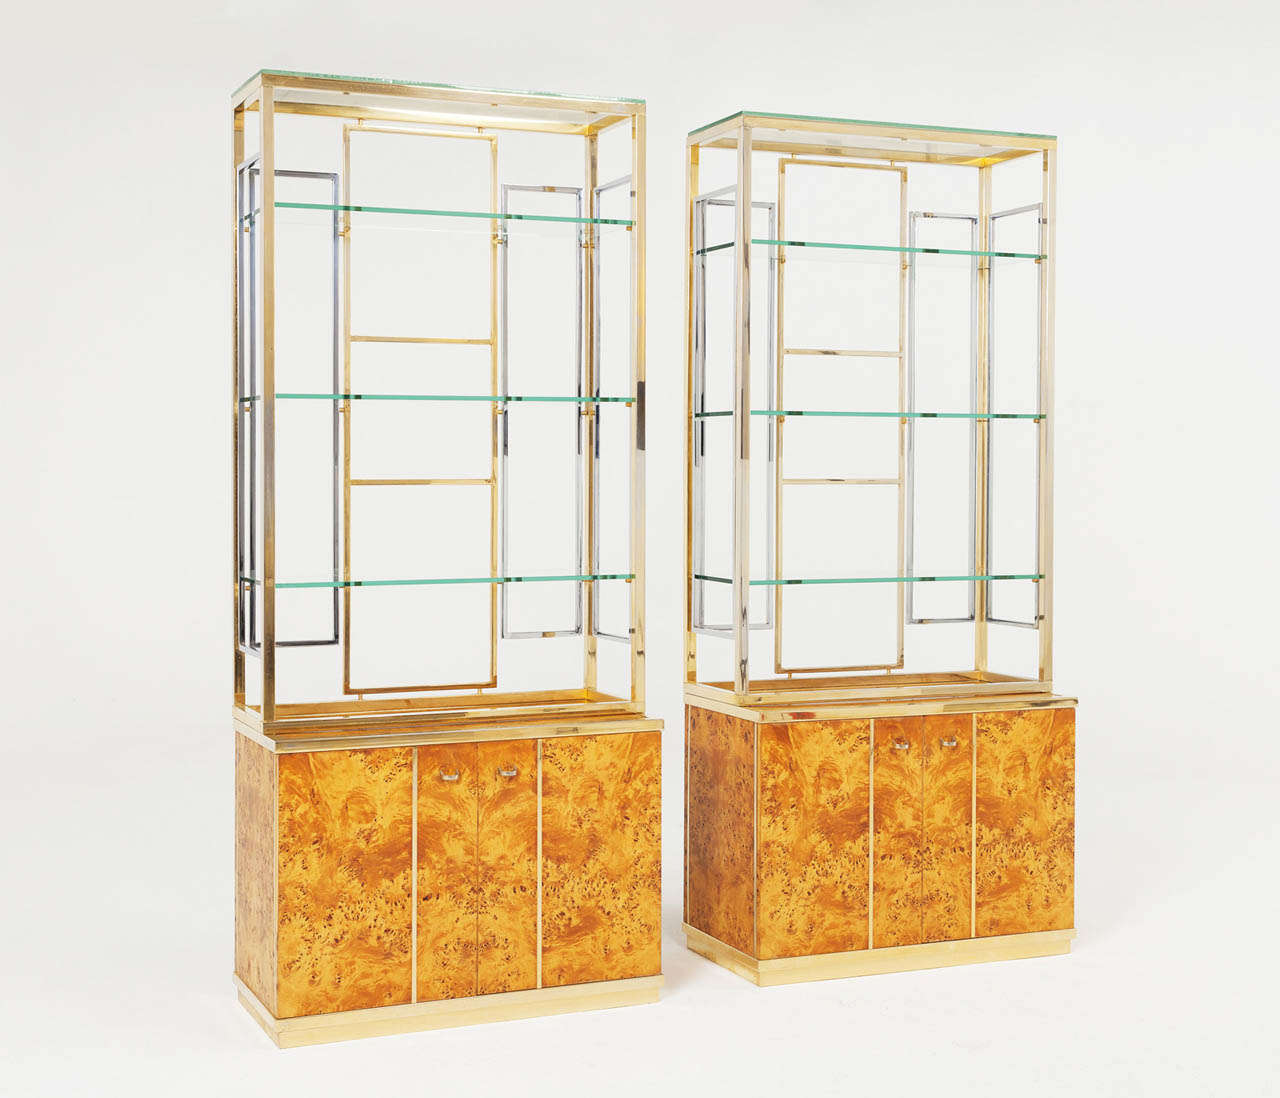 Cabinets, burl, brass and glass, Italy, ca. 1960.

These high cabinets have polished chrome and brass details and the cabinets are equipped with glass shelves.

Please note the price is per item.